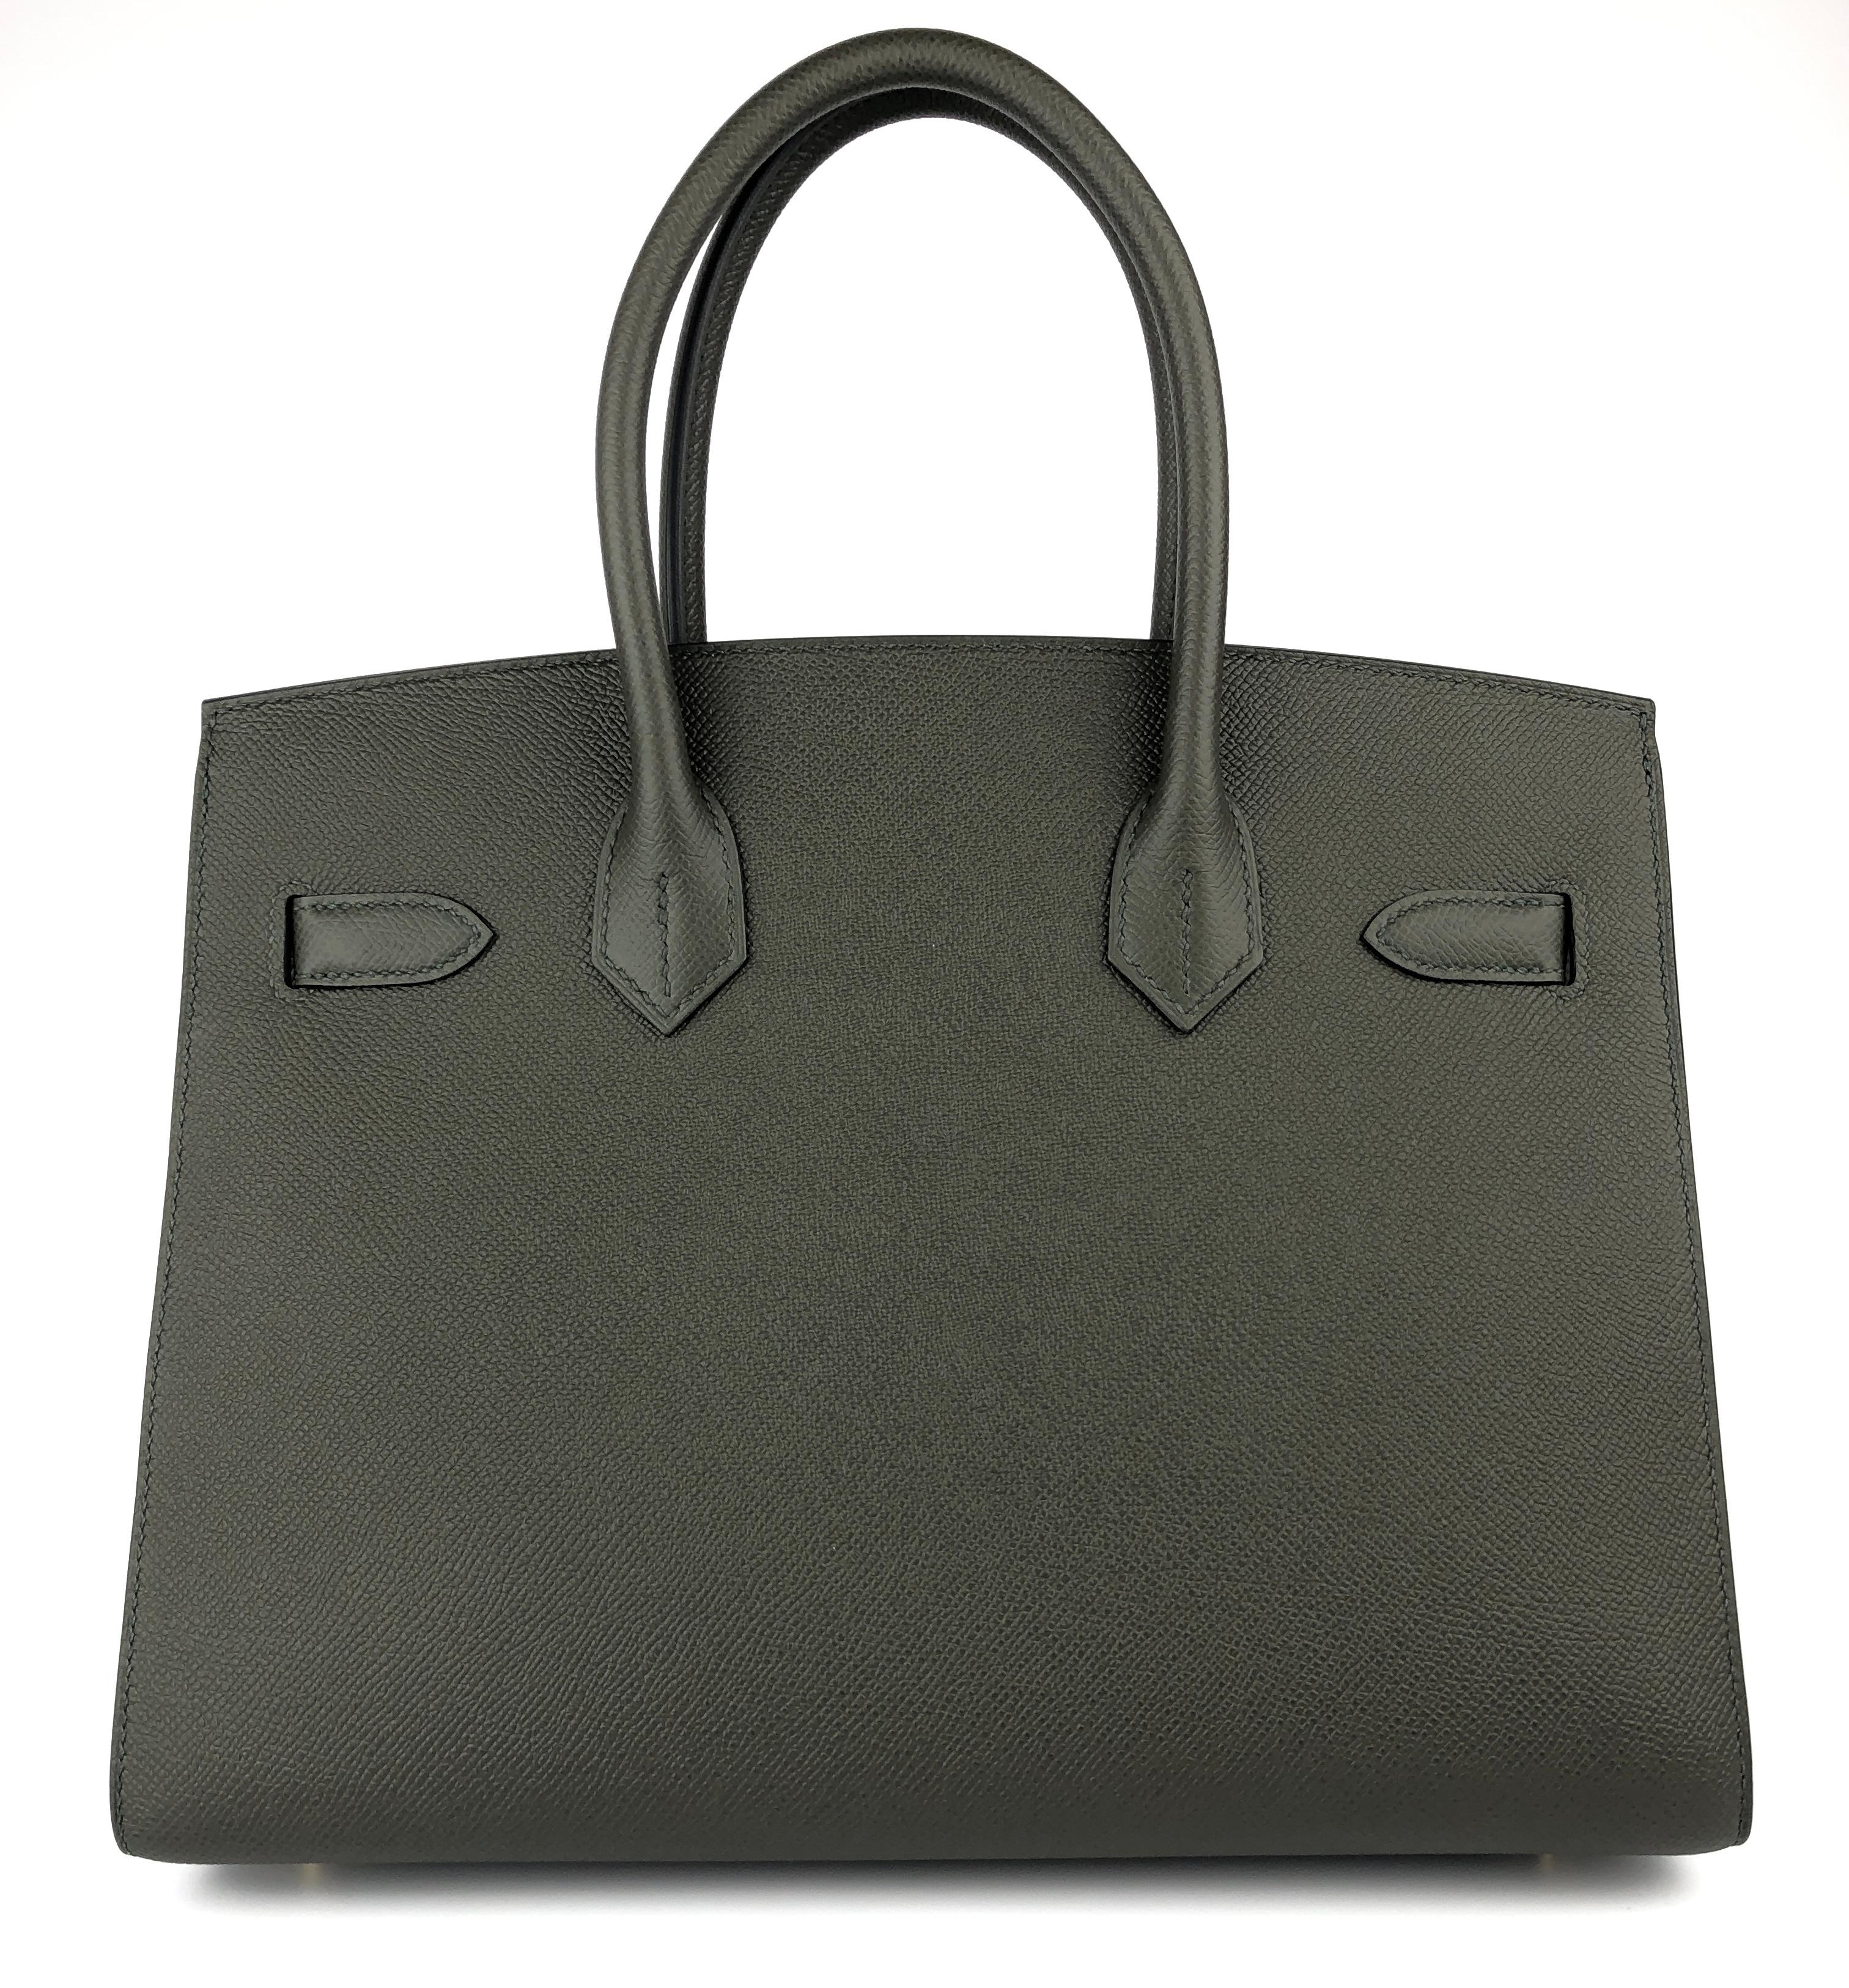 Hermes Birkin 30 Sellier Vert de Gris Green Gray Epsom Leather Gold Hardware In New Condition For Sale In Miami, FL